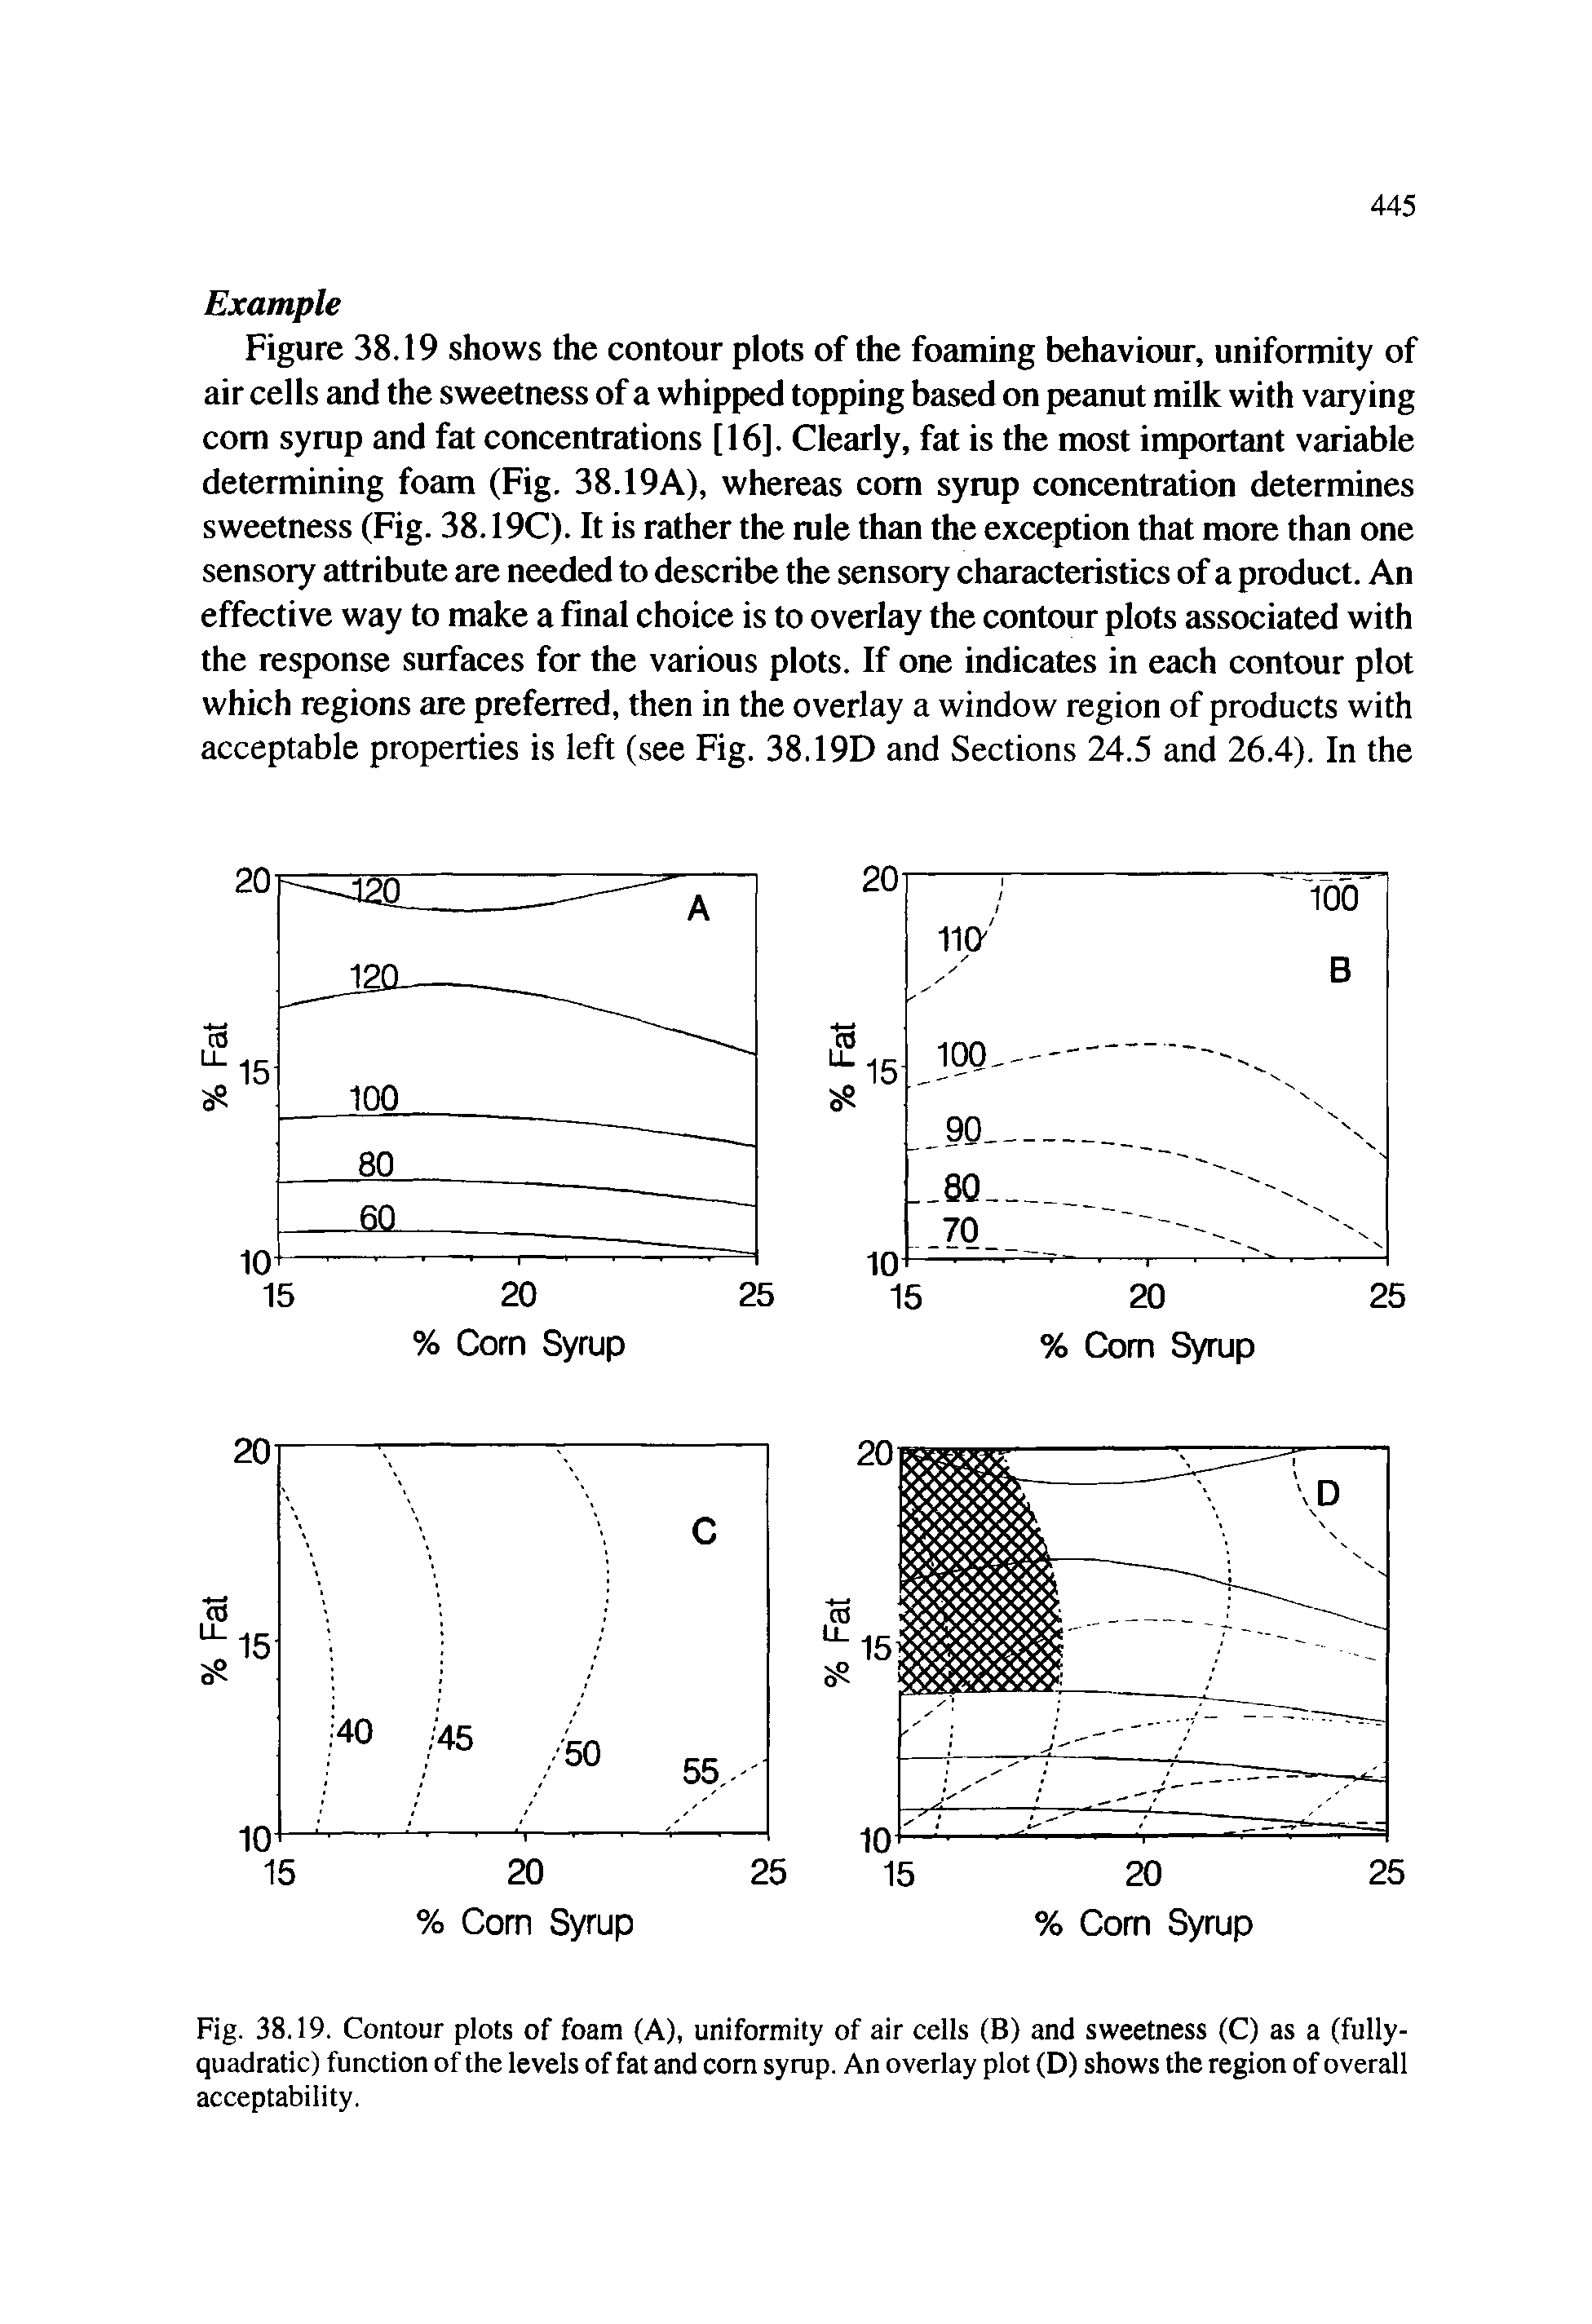 Figure 38.19 shows the contour plots of the foaming behaviour, uniformity of air cells and the sweetness of a whipped topping based on peanut milk with varying com syrup and fat concentrations [16]. Clearly, fat is the most important variable determining foam (Fig. 38.19A), whereas com syrap concentration determines sweetness (Fig. 38.19C). It is rather the mle than the exception that more than one sensory attribute are needed to describe the sensory characteristics of a product. An effective way to make a final choice is to overlay the contour plots associated with the response surfaces for the various plots. If one indicates in each contour plot which regions are preferred, then in the overlay a window region of products with acceptable properties is left (see Fig. 38.19D and Sections 24.5 and 26.4). In the...